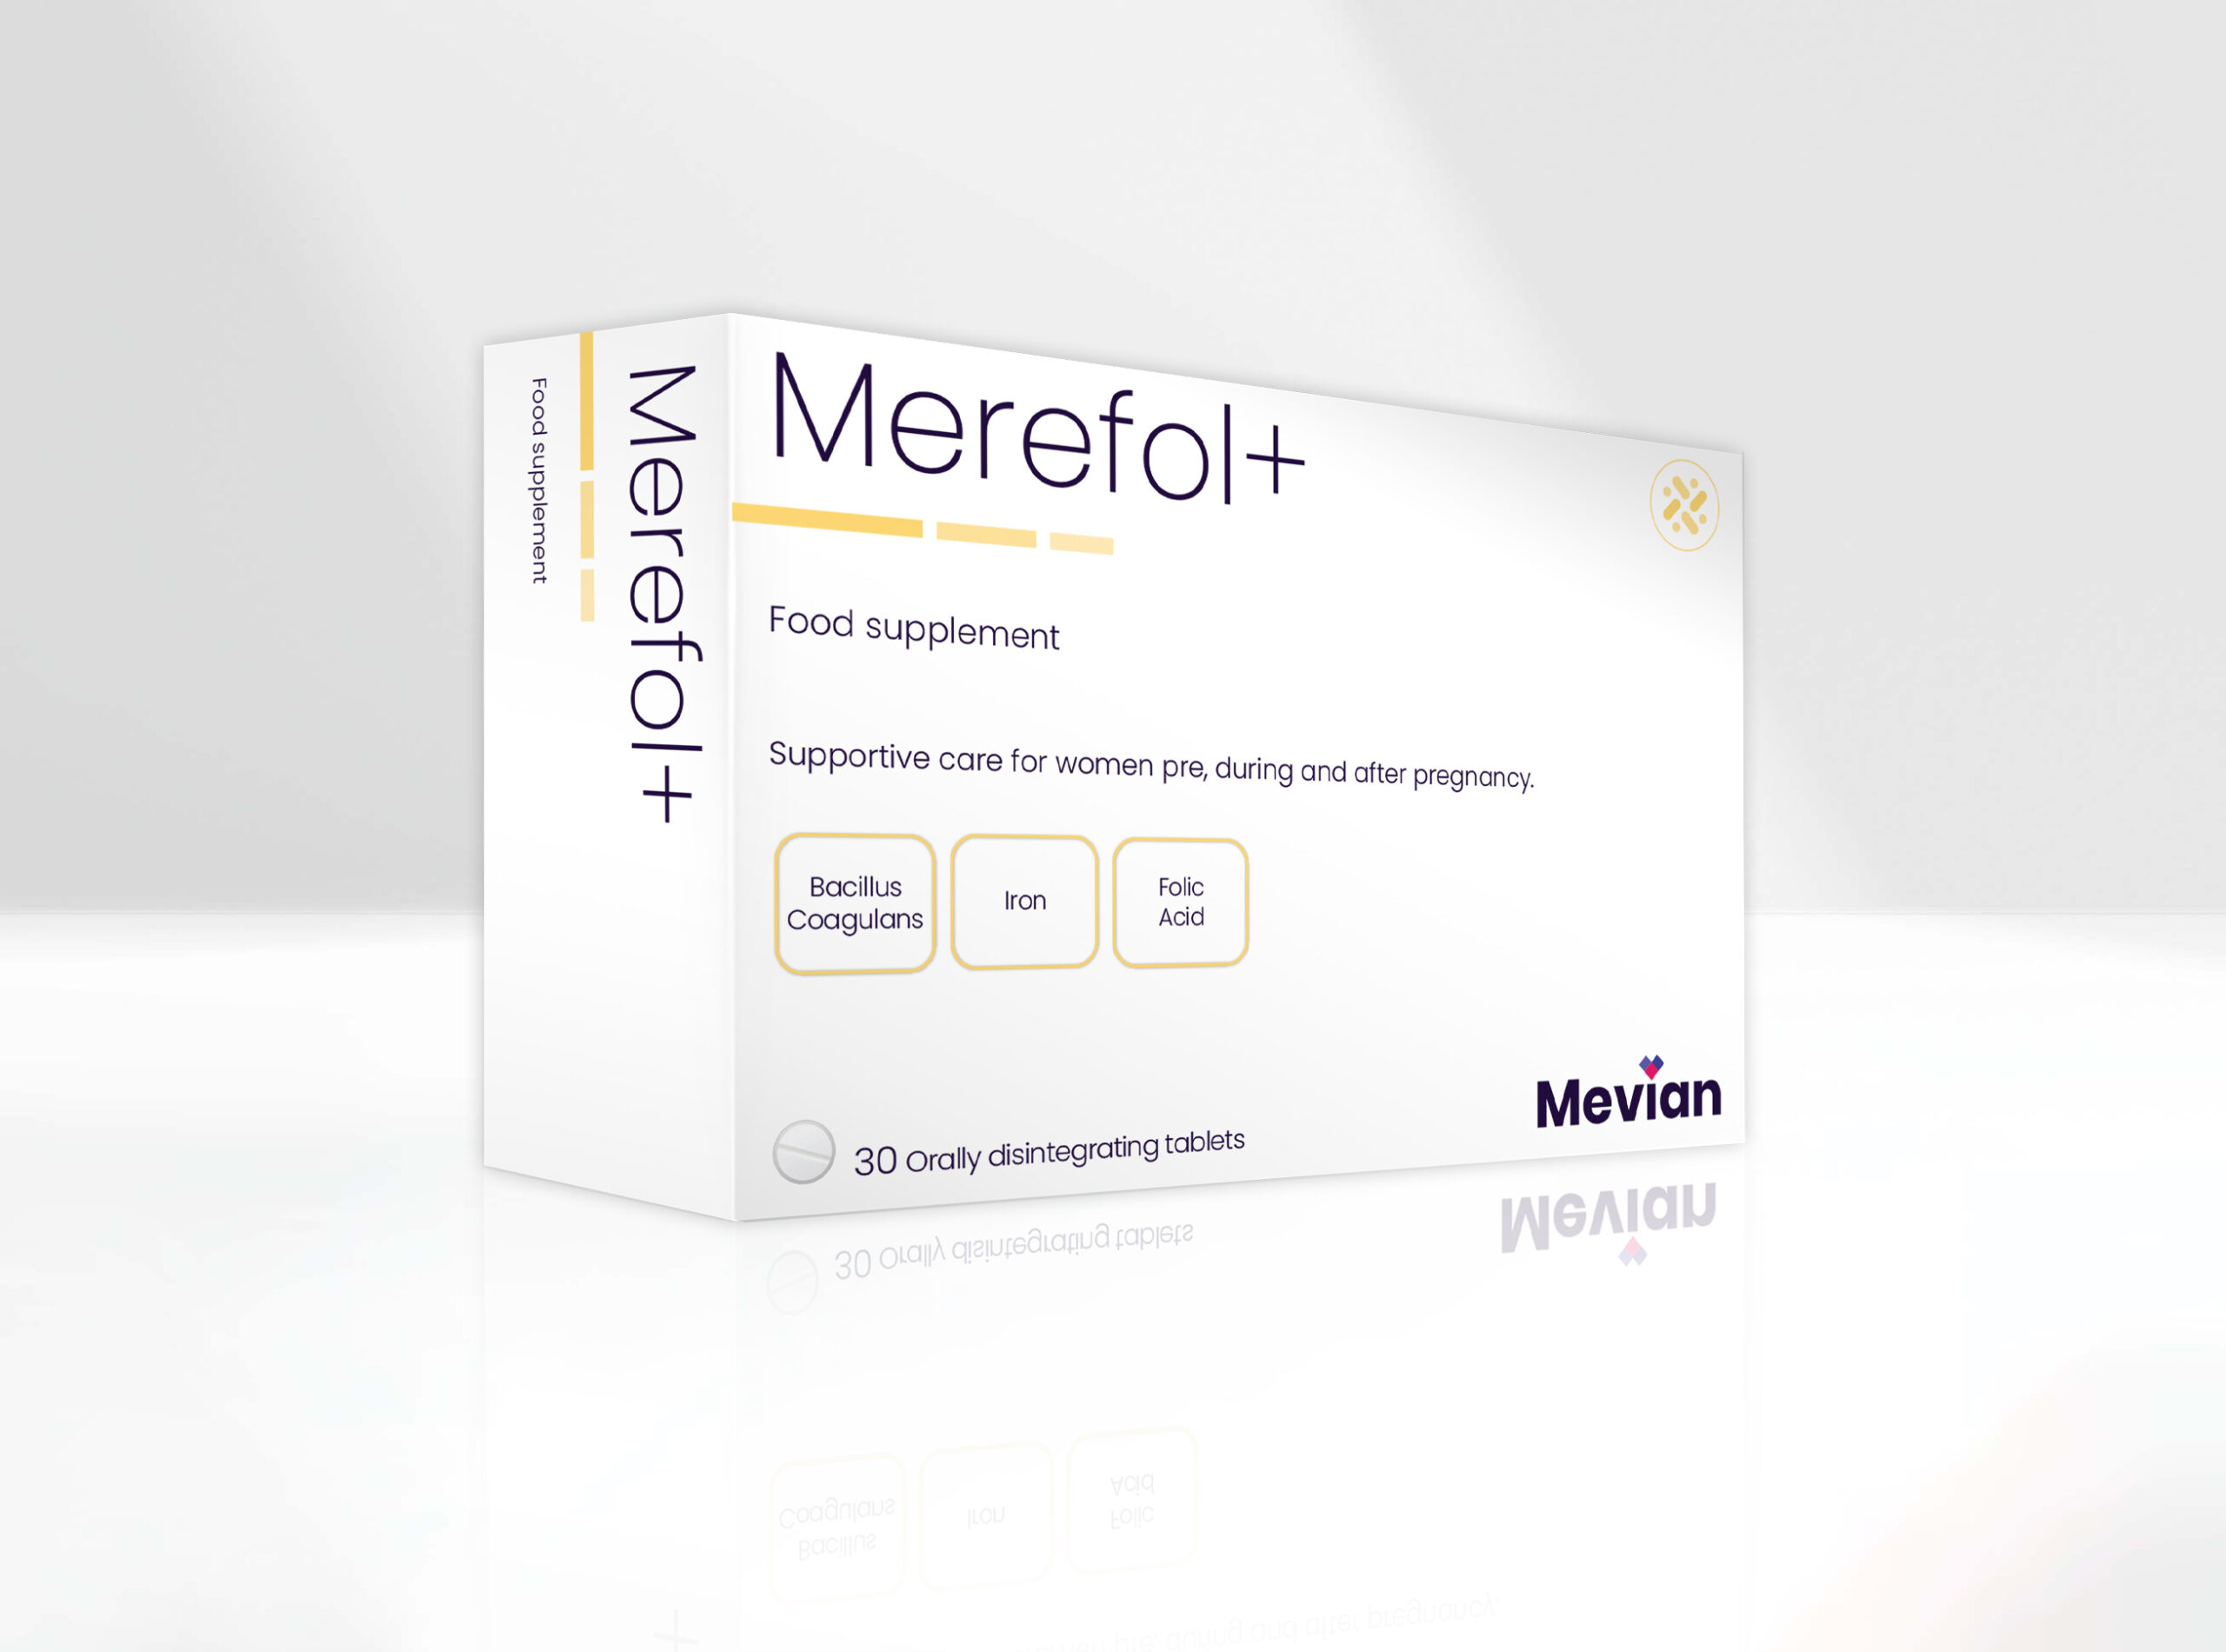 Merefol+ is a clinically supported proven solution with extra potency probiotics, iron, and folic acid that is indicated for the well-being of women pre, during, and after pregnancy and lactation.